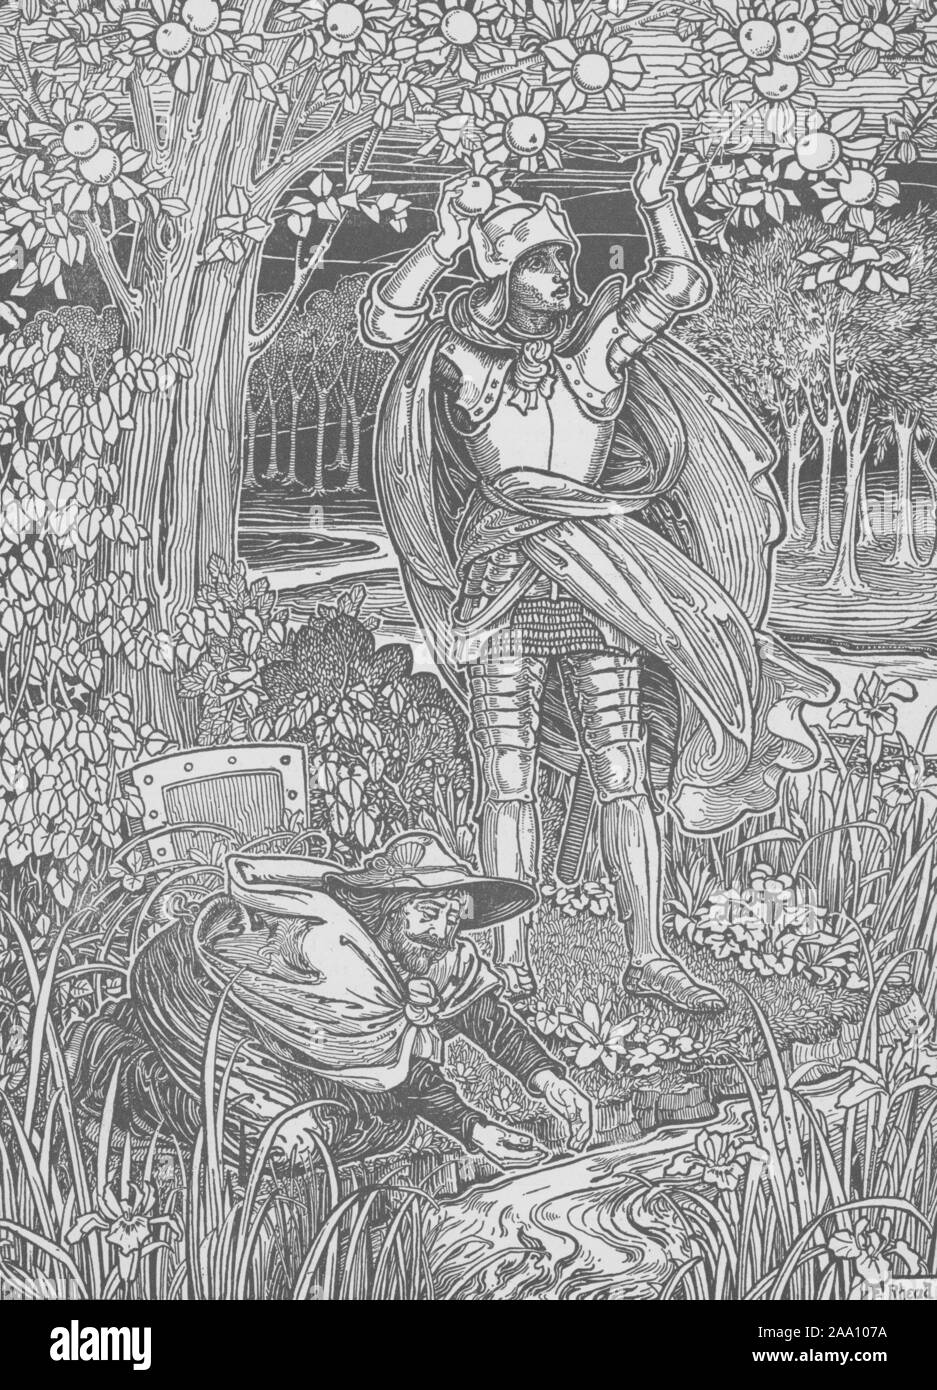 Engraving of a scene from the book 'Pilgrim's Progress' by John Bunyan, featuring Christian drinking water from a brook and Hopeful picking fruit from a nearby tree, illustrated by Frederick Alfred Rhead, published by The Century Co, 1898. From the New York Public Library. () Stock Photo